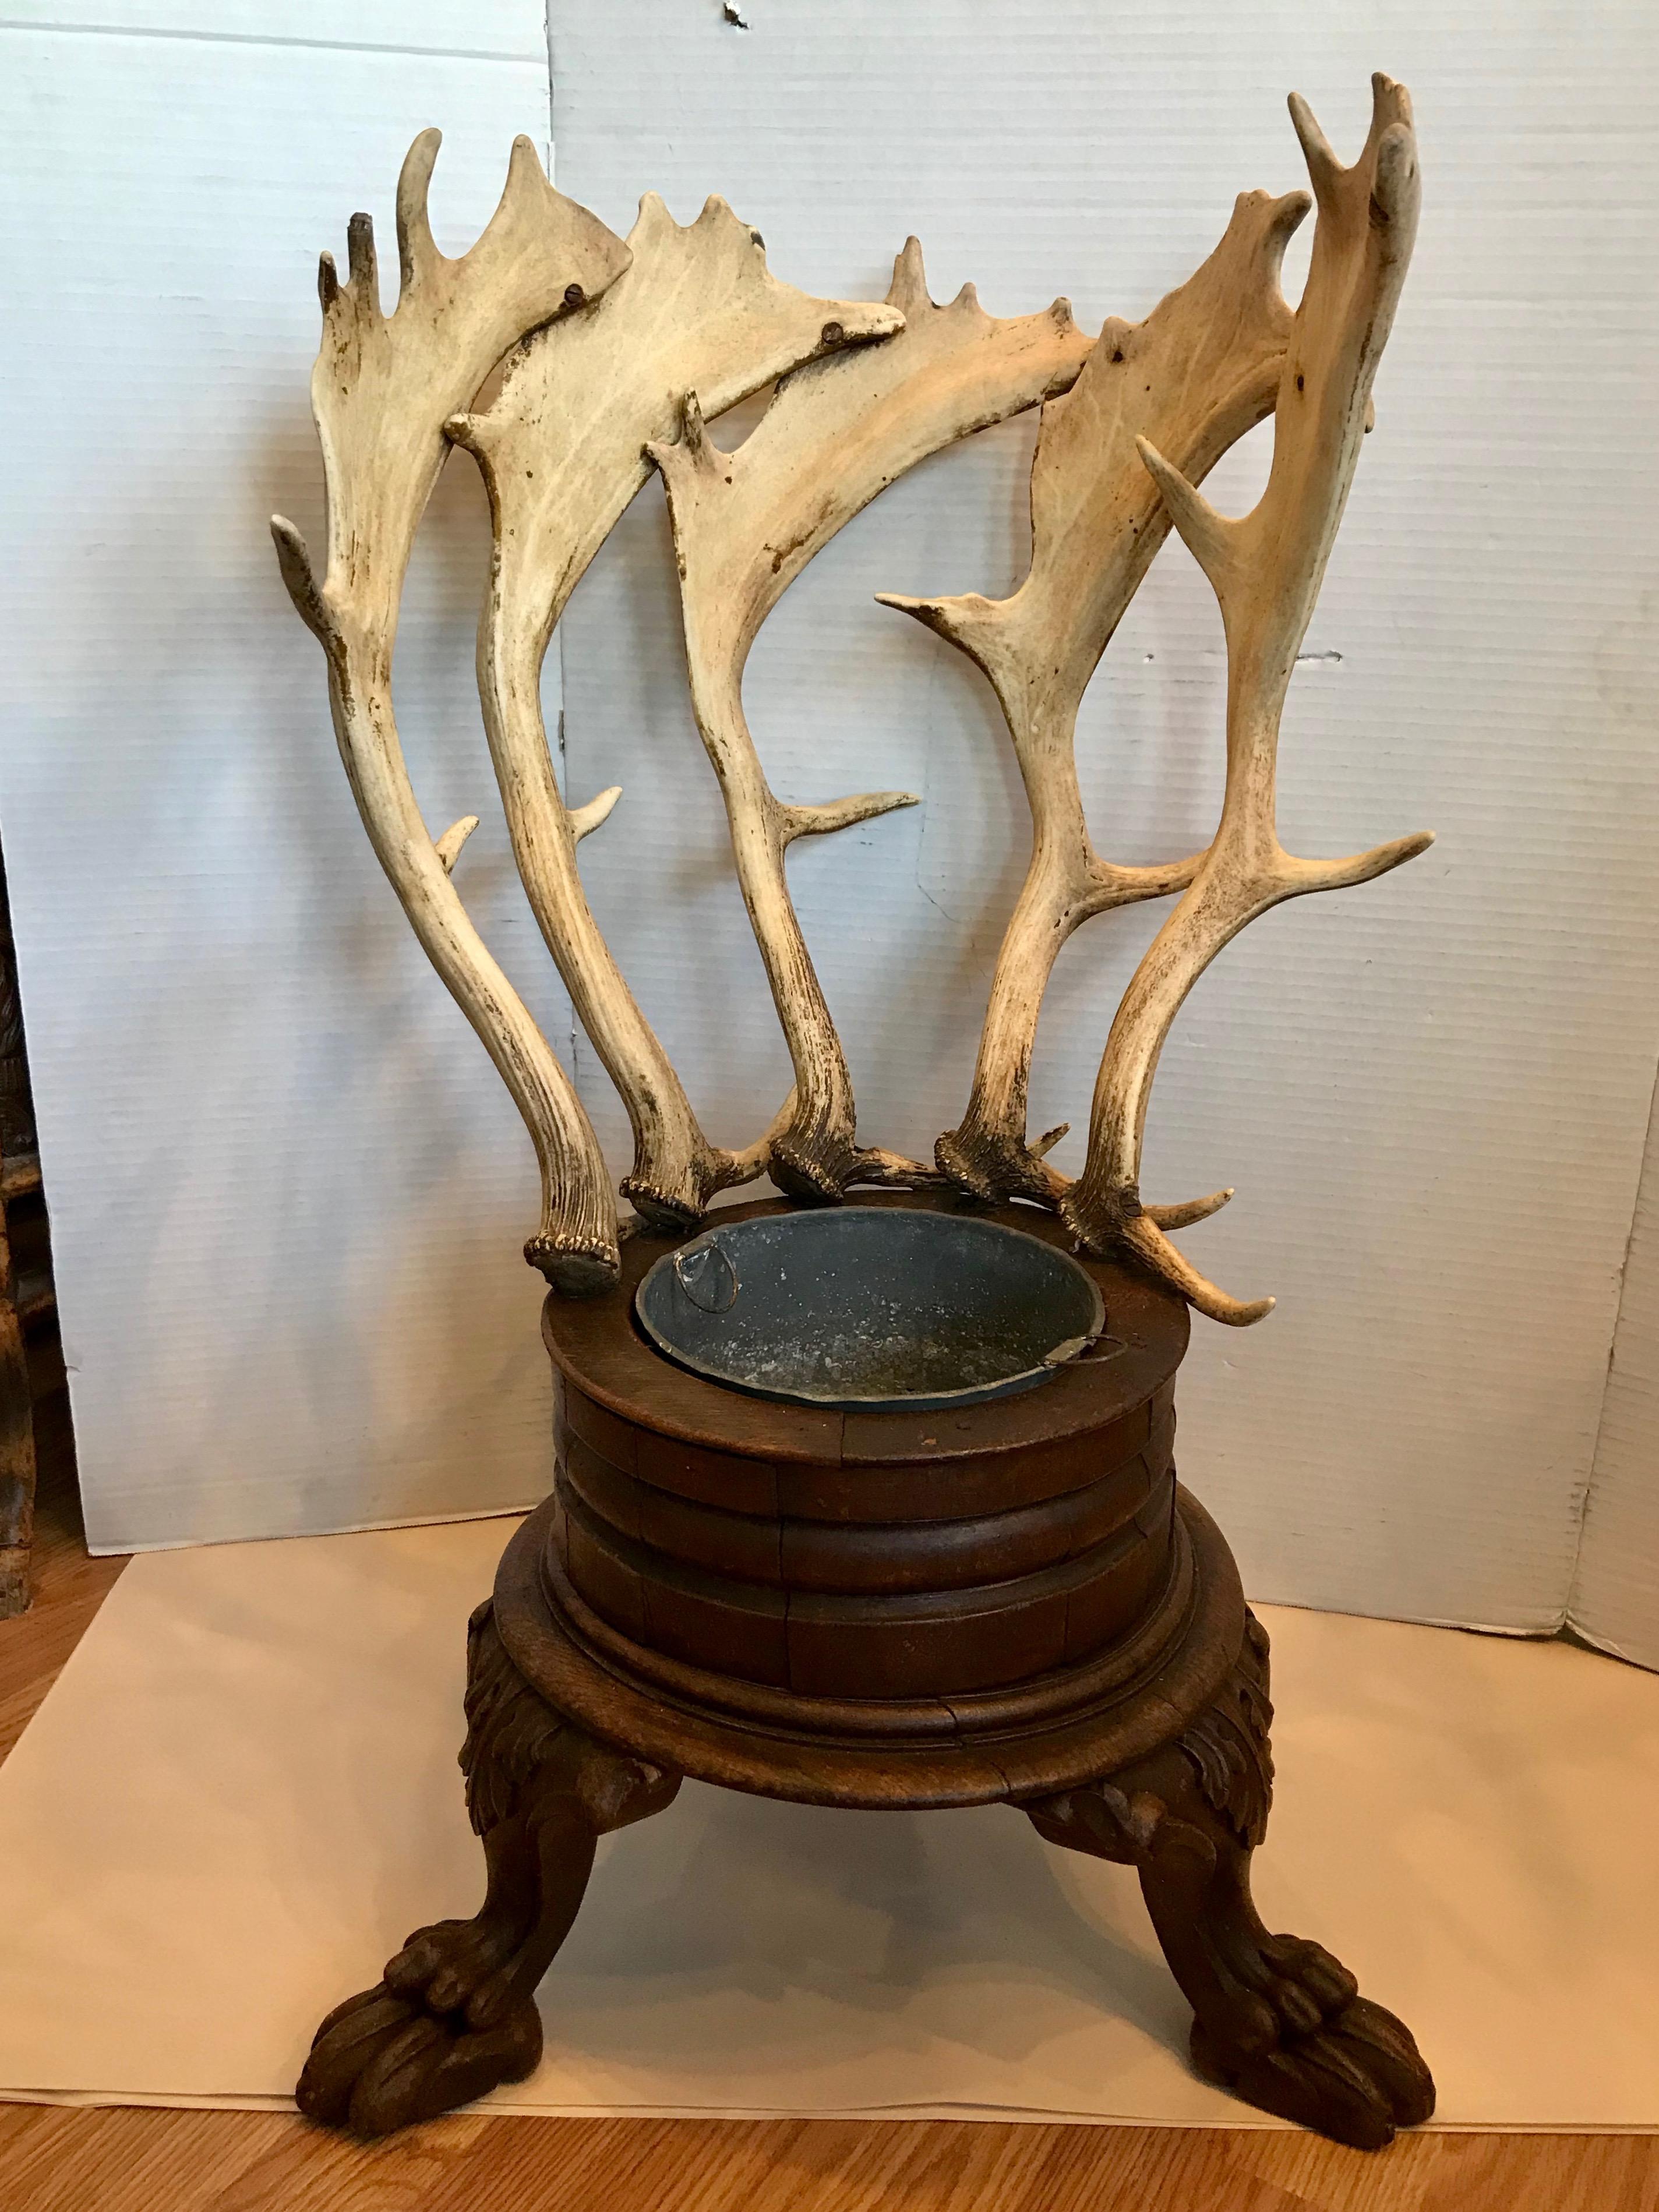 Dramatic in scale and proportion. A rare and substantial piece of unusual
design. The piece is raised upon curved, carved legs that terminate with claw feet. The removable liner is original. A singularly stunning continental
piece